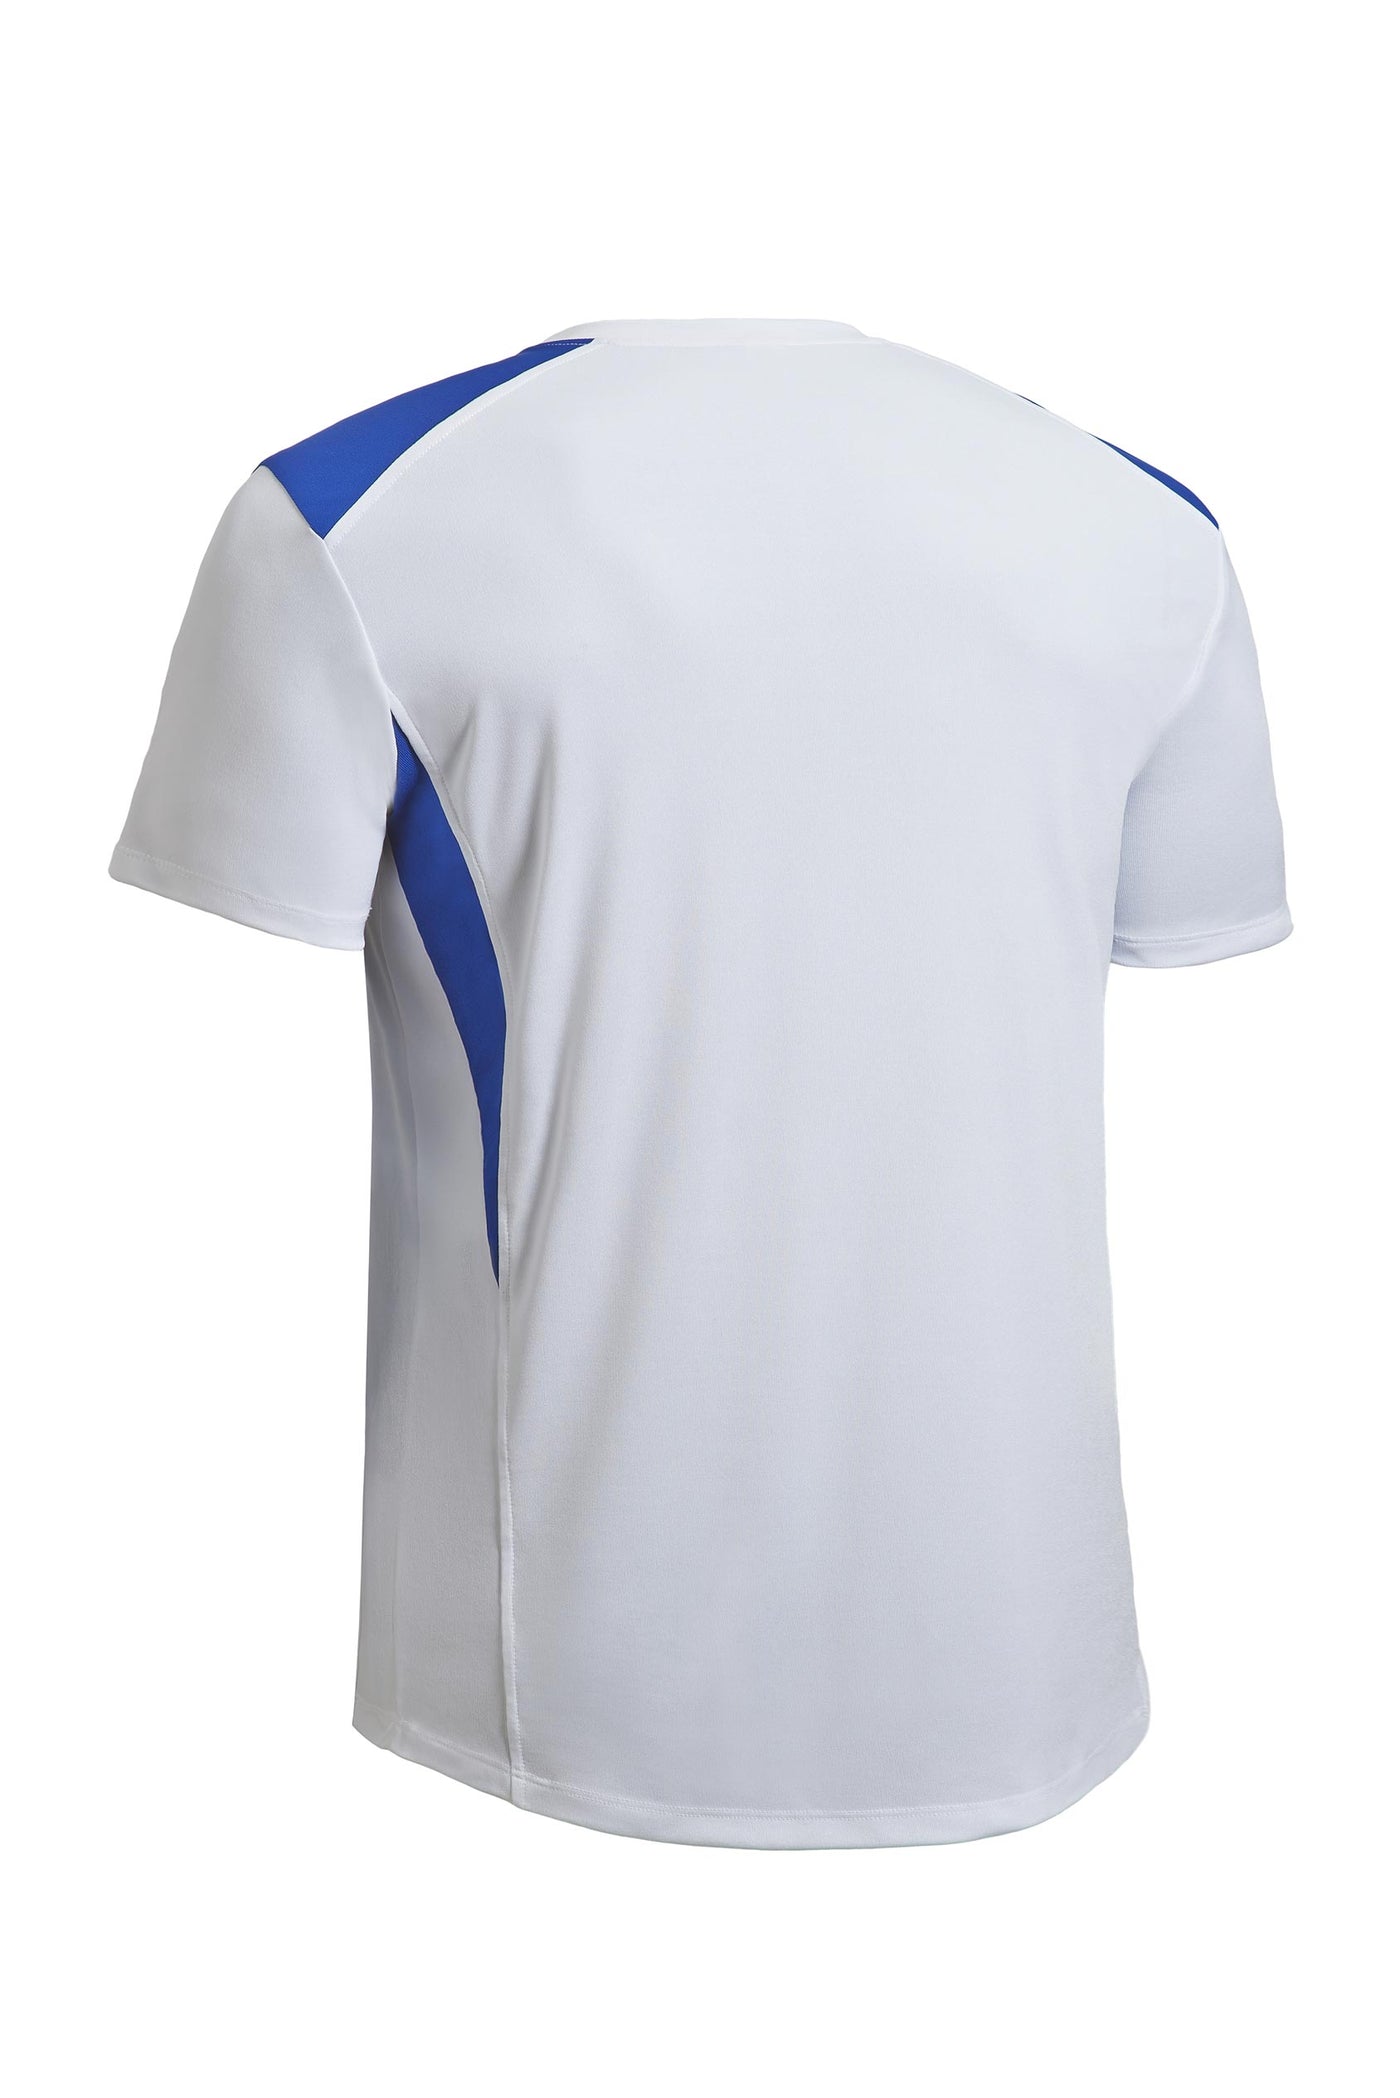 Expert Apparel Made in USA Men's Pk Max Colorblock Fitness Gym Sport Tee white royal blue image 2#color_white-royal